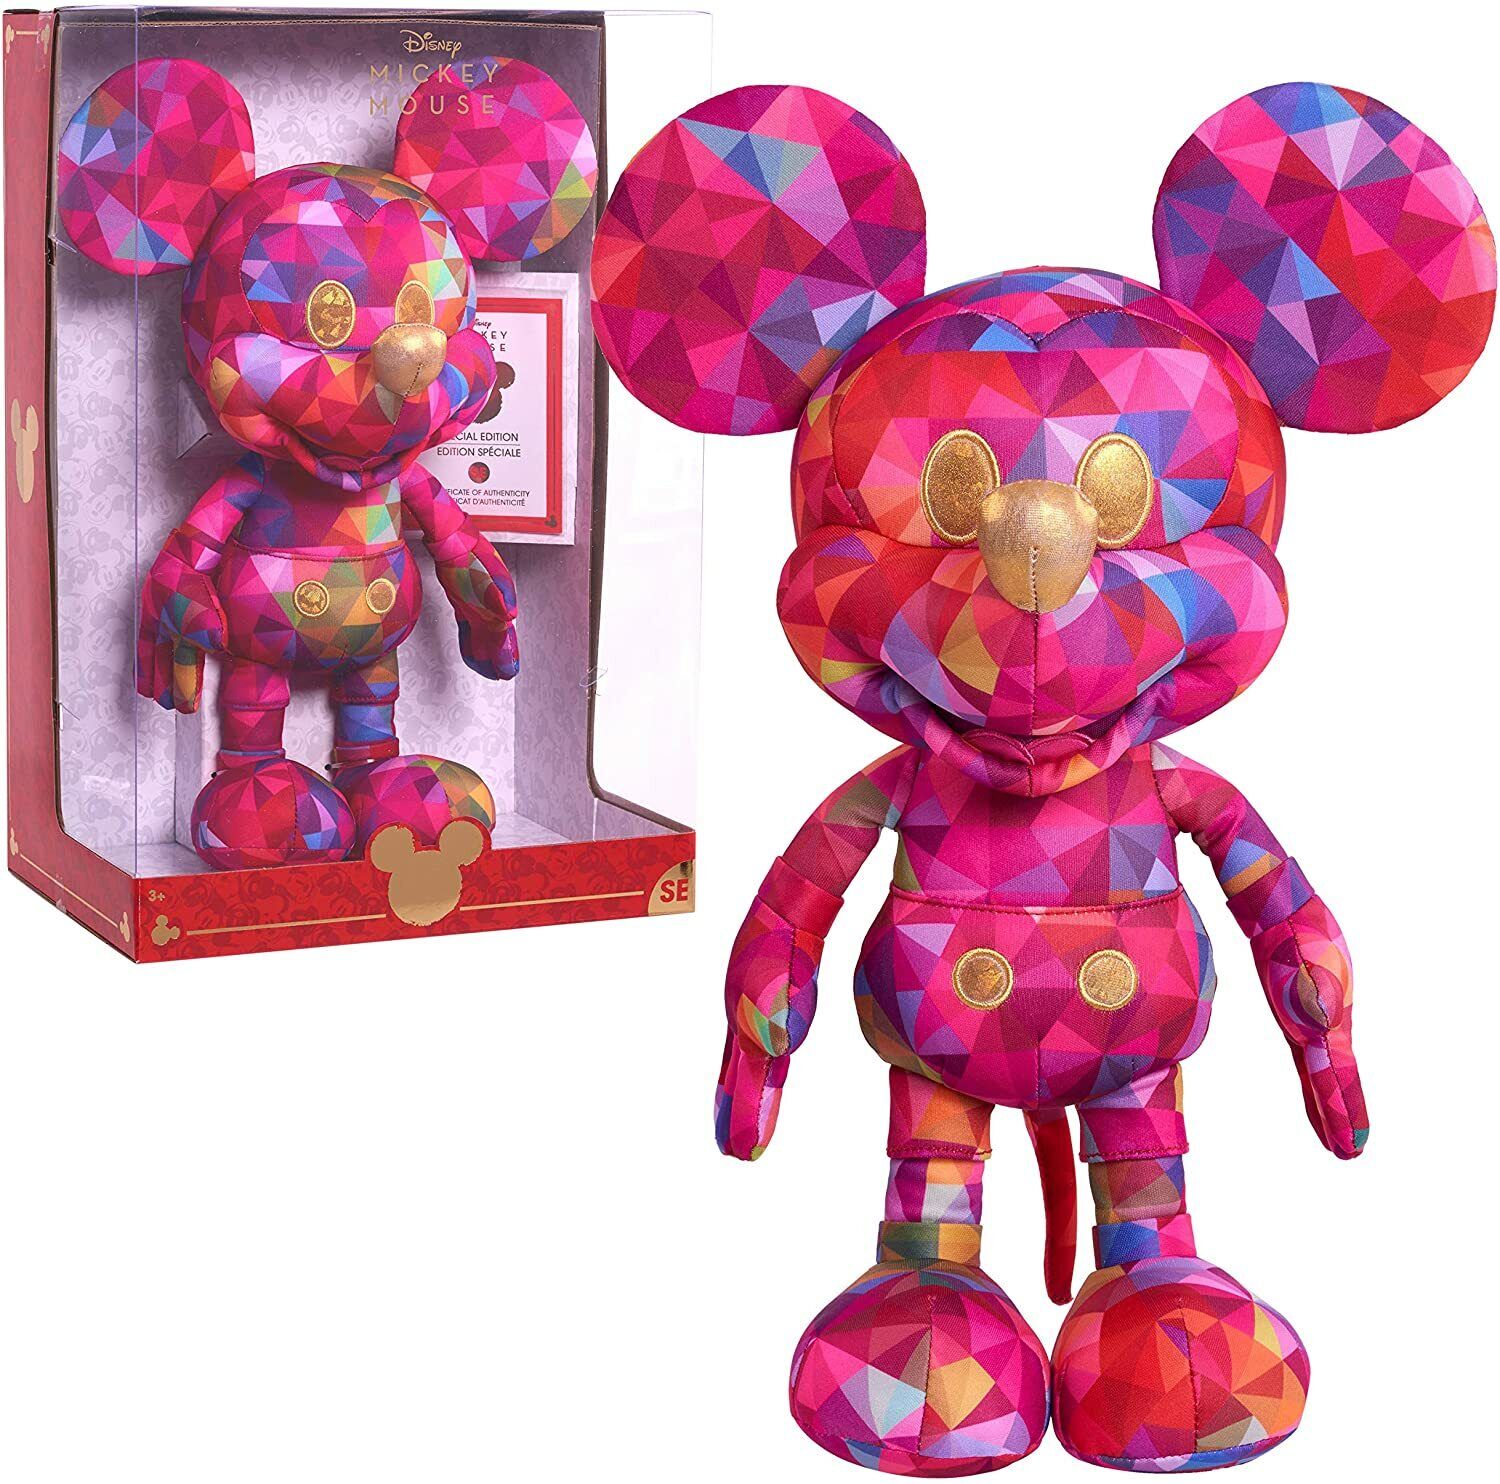 Limited Edition Disney Kaleidoscope of Color Mickey Mouse Plush Oct.8,2020 